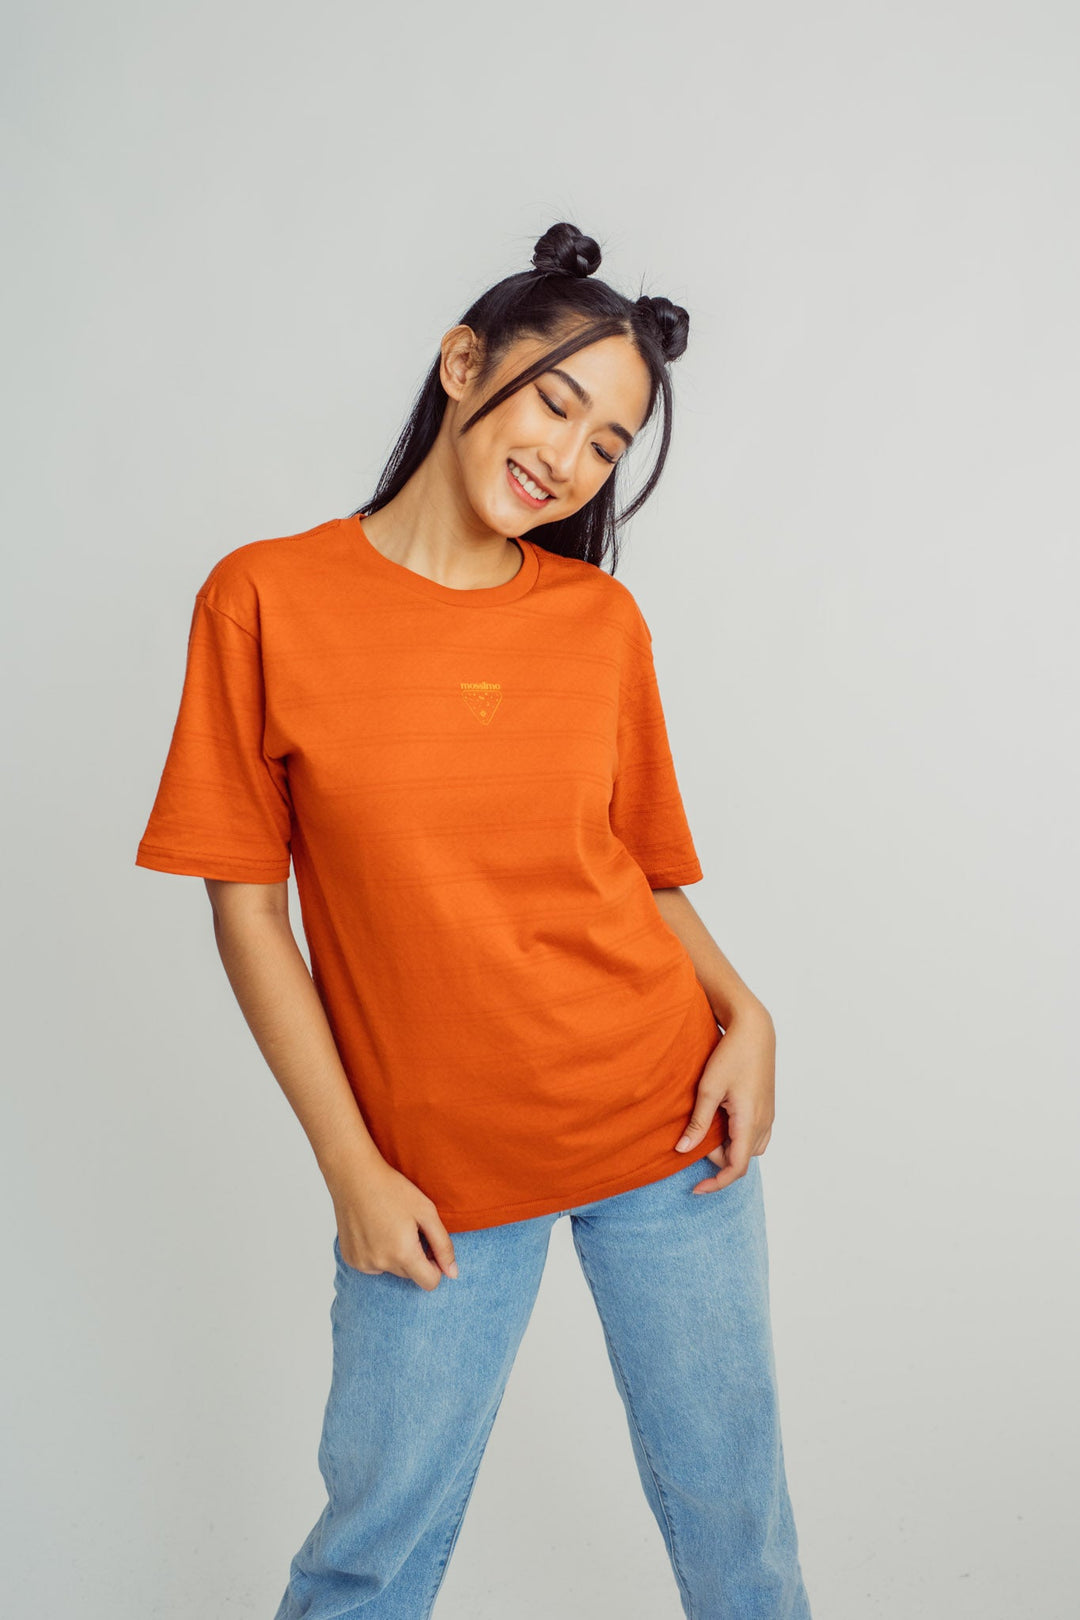 Rust Mossimo with Small Glaxy Hi Density Print Modern Fit Tee - Mossimo PH